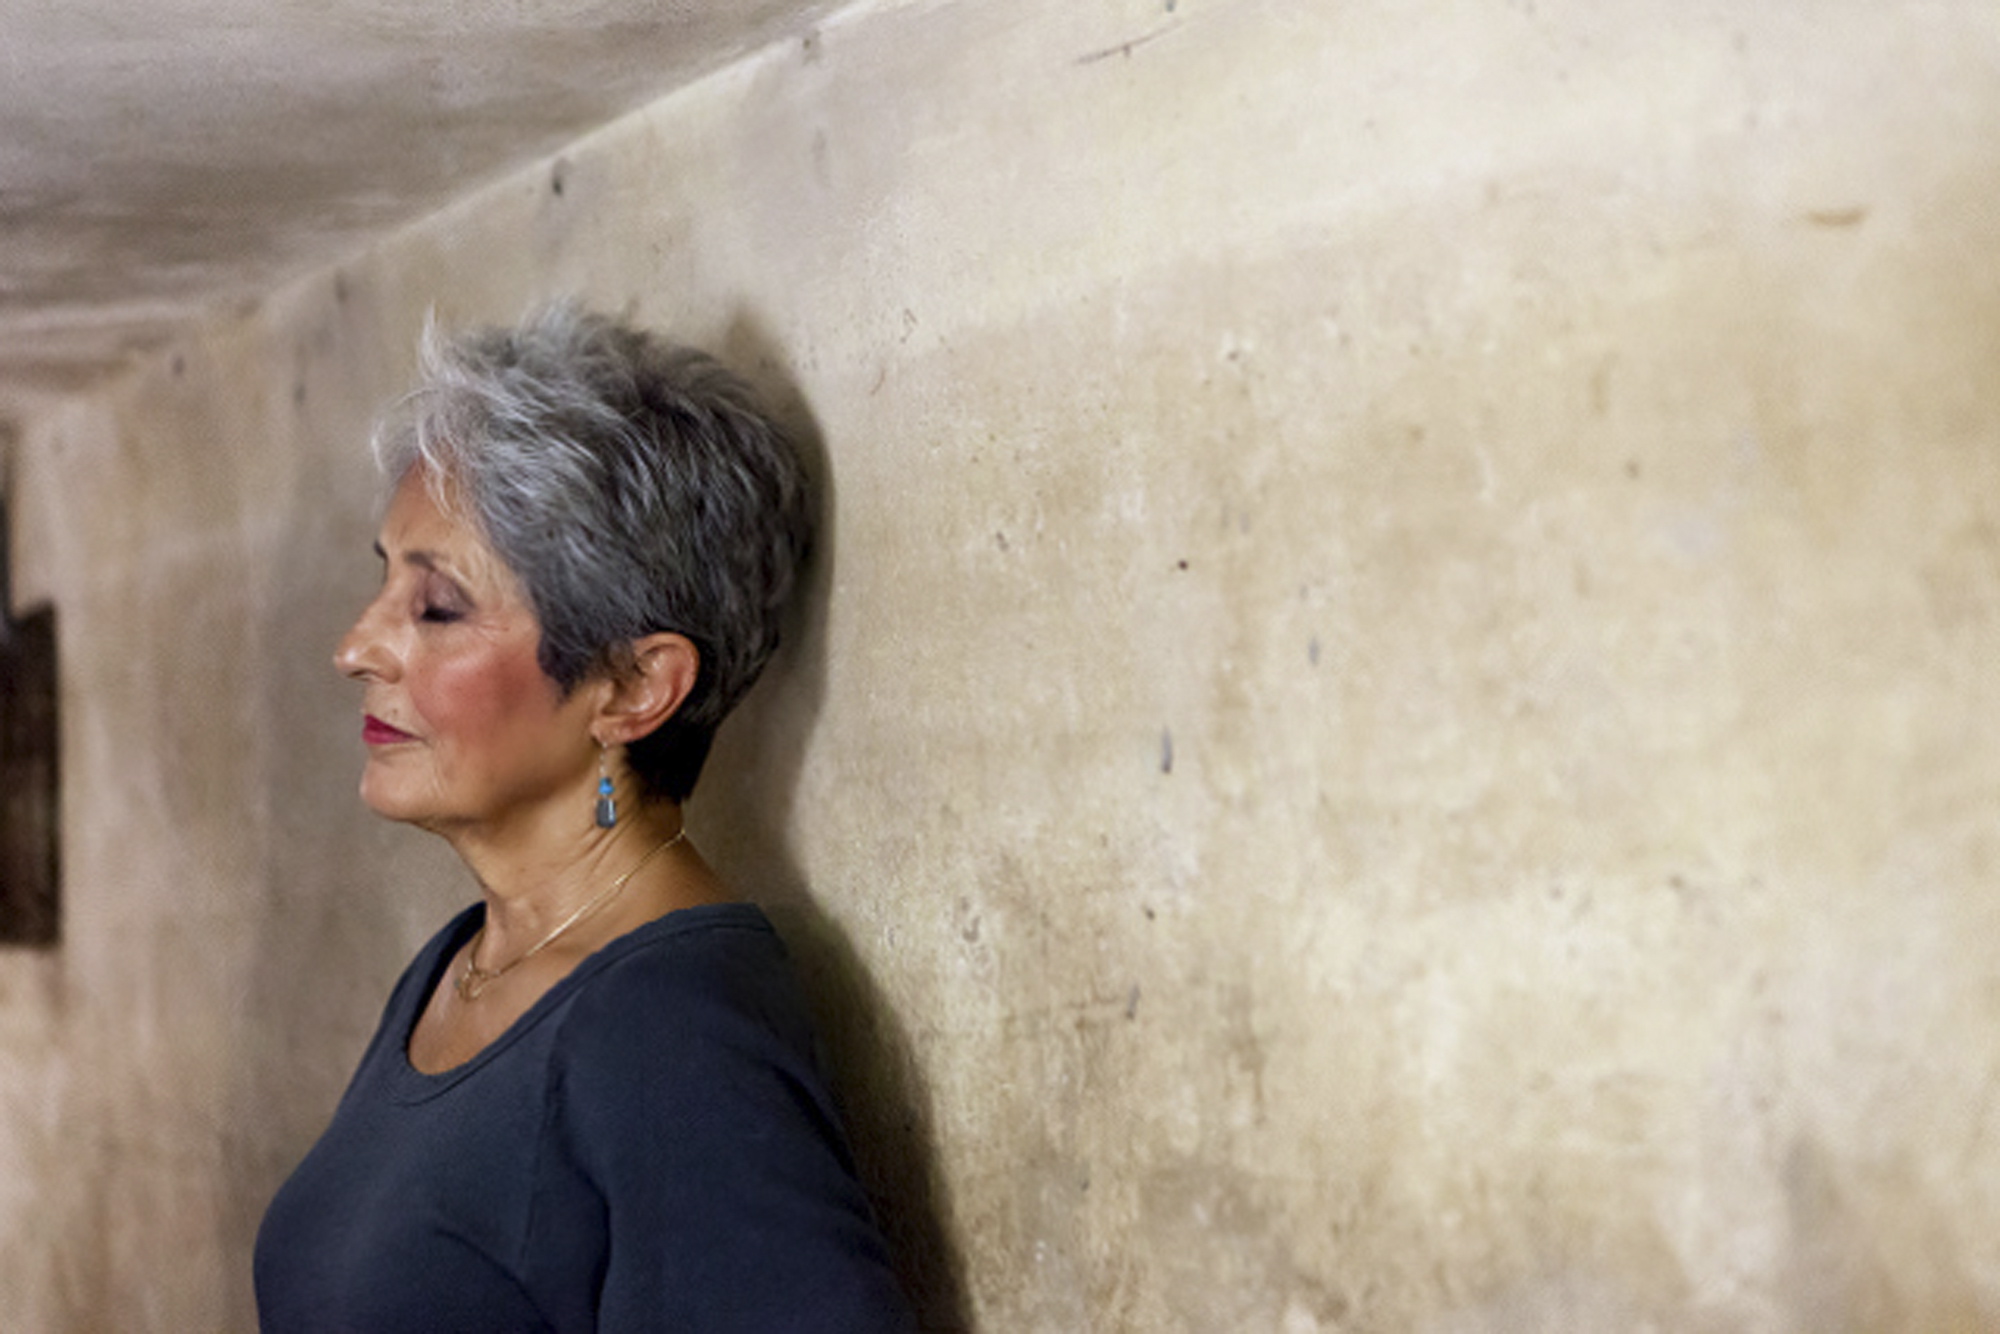 Joan Baez stands with her back to the wall of an historic bomb shelter under the Metropole Hotel in Hanoi, Vietnam.